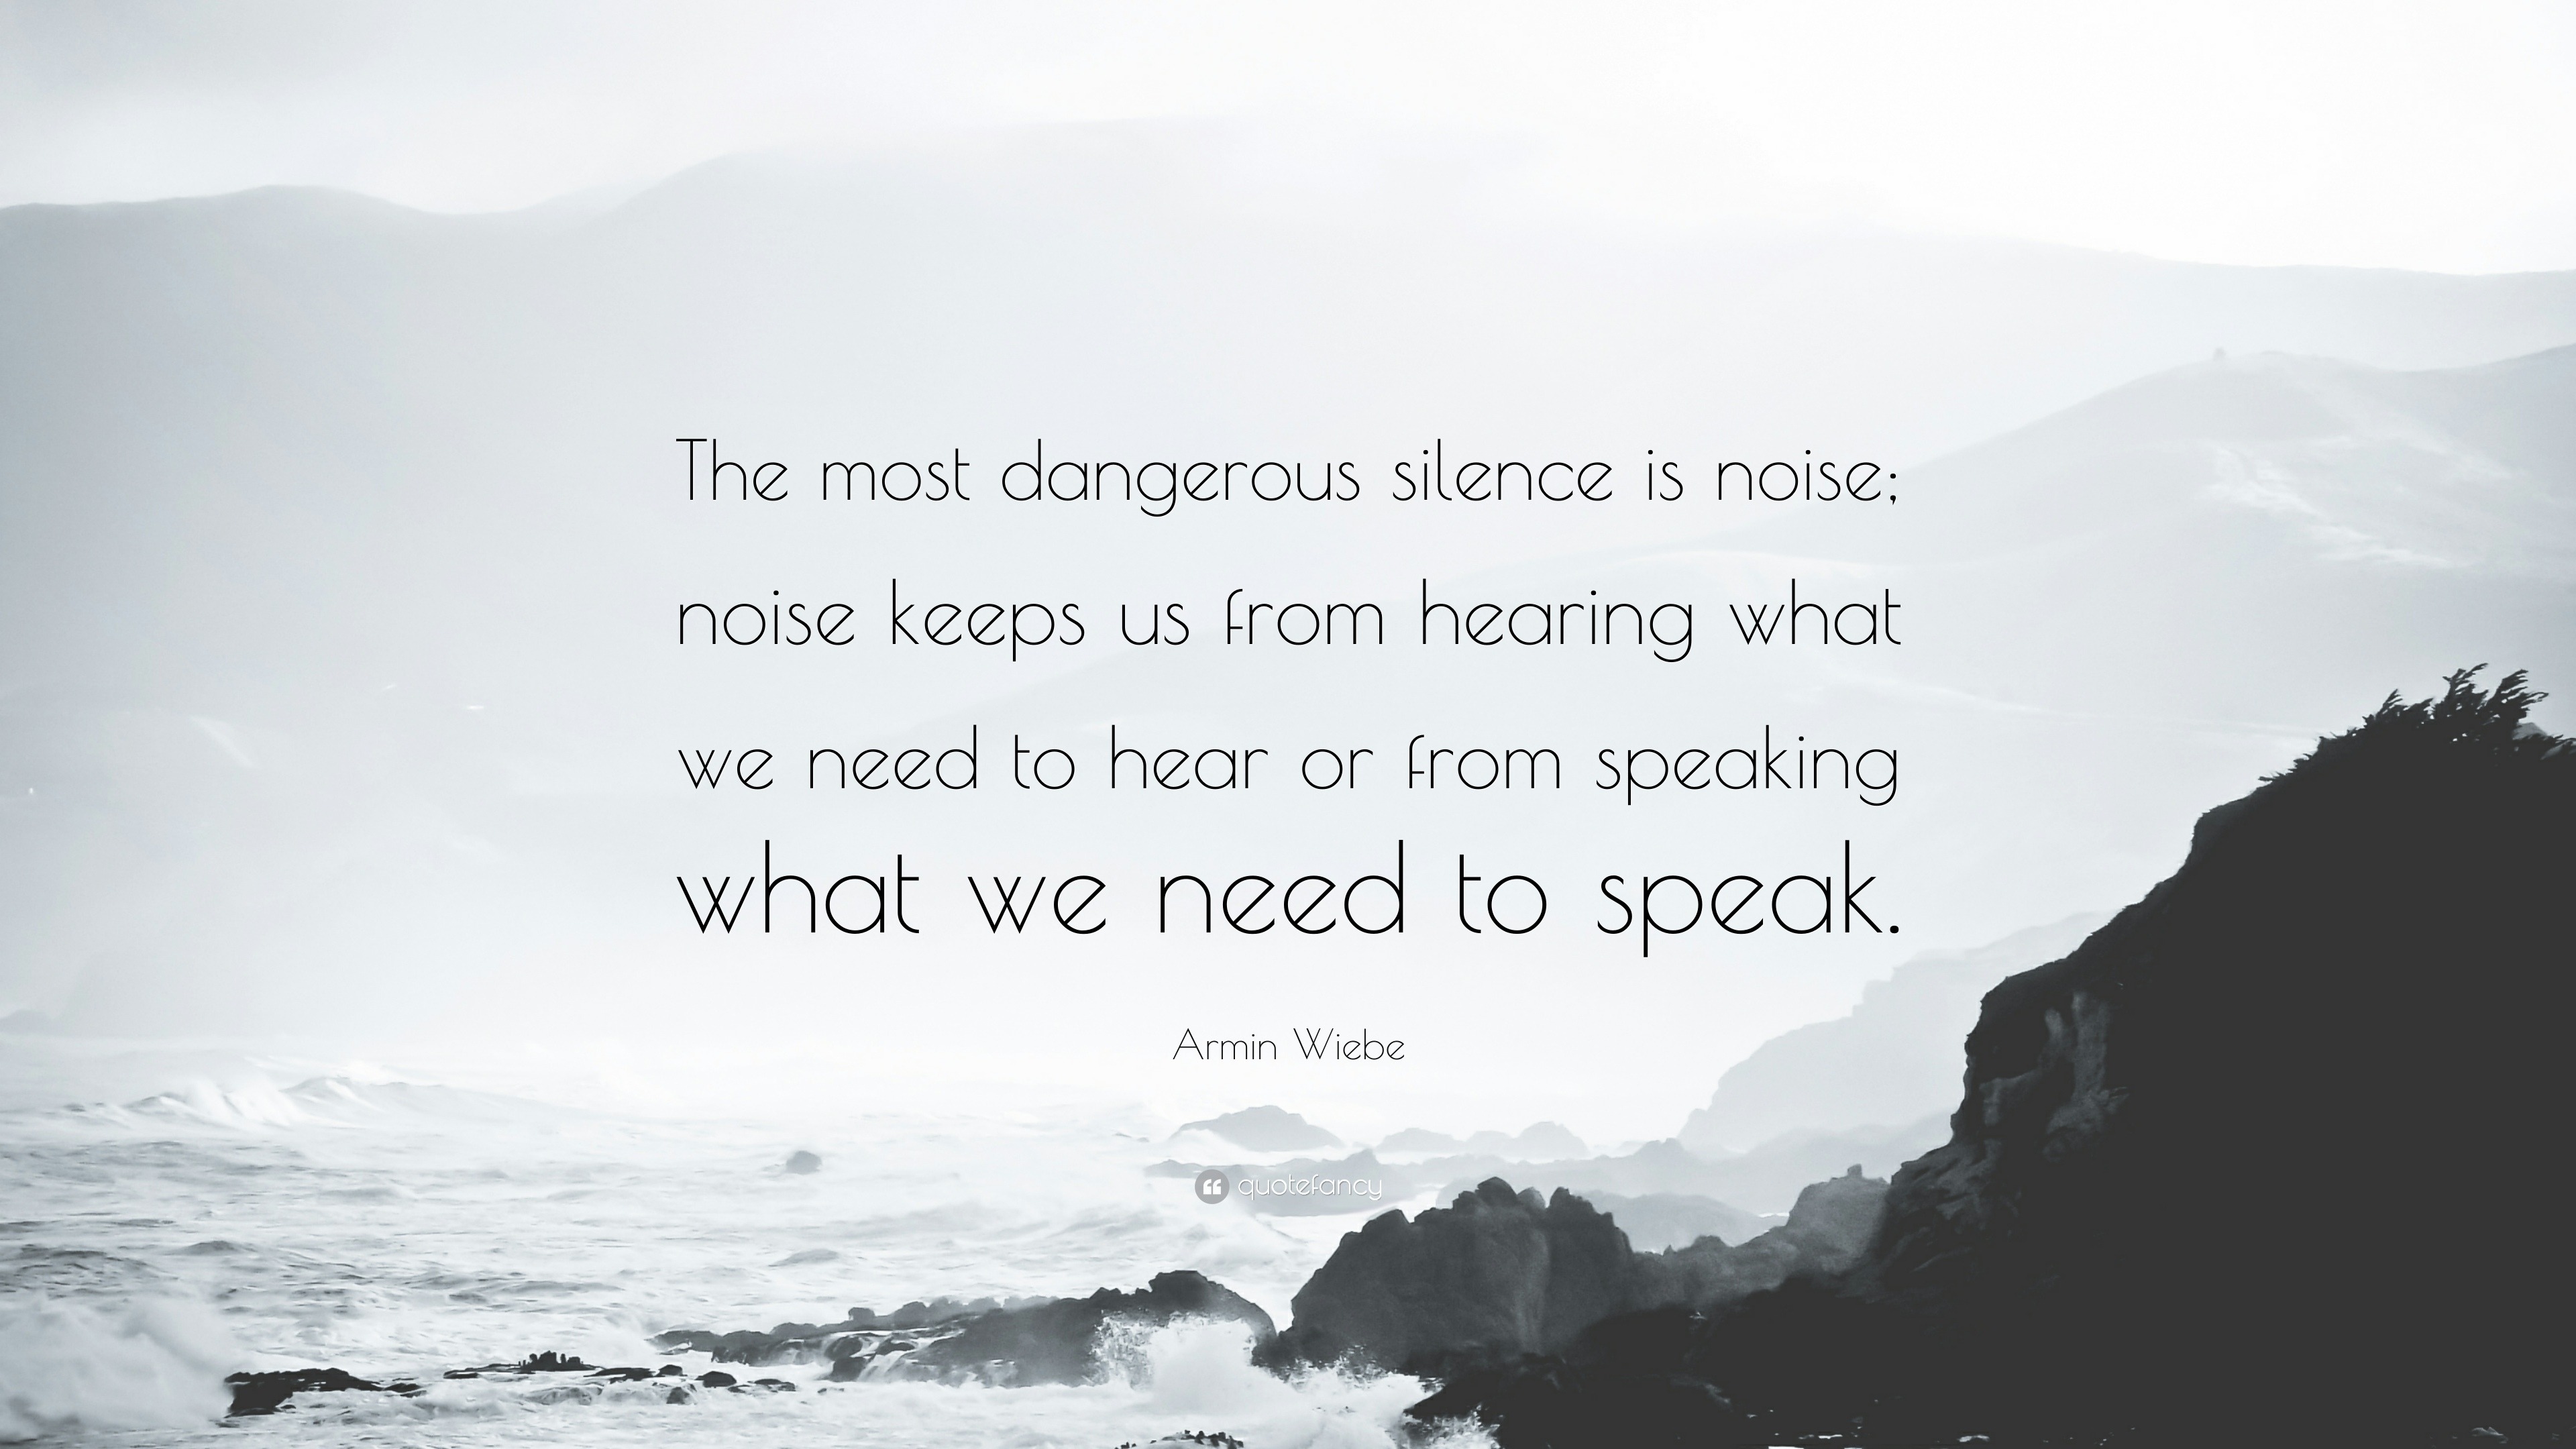 Armin Wiebe Quote: “The most dangerous silence is noise; noise